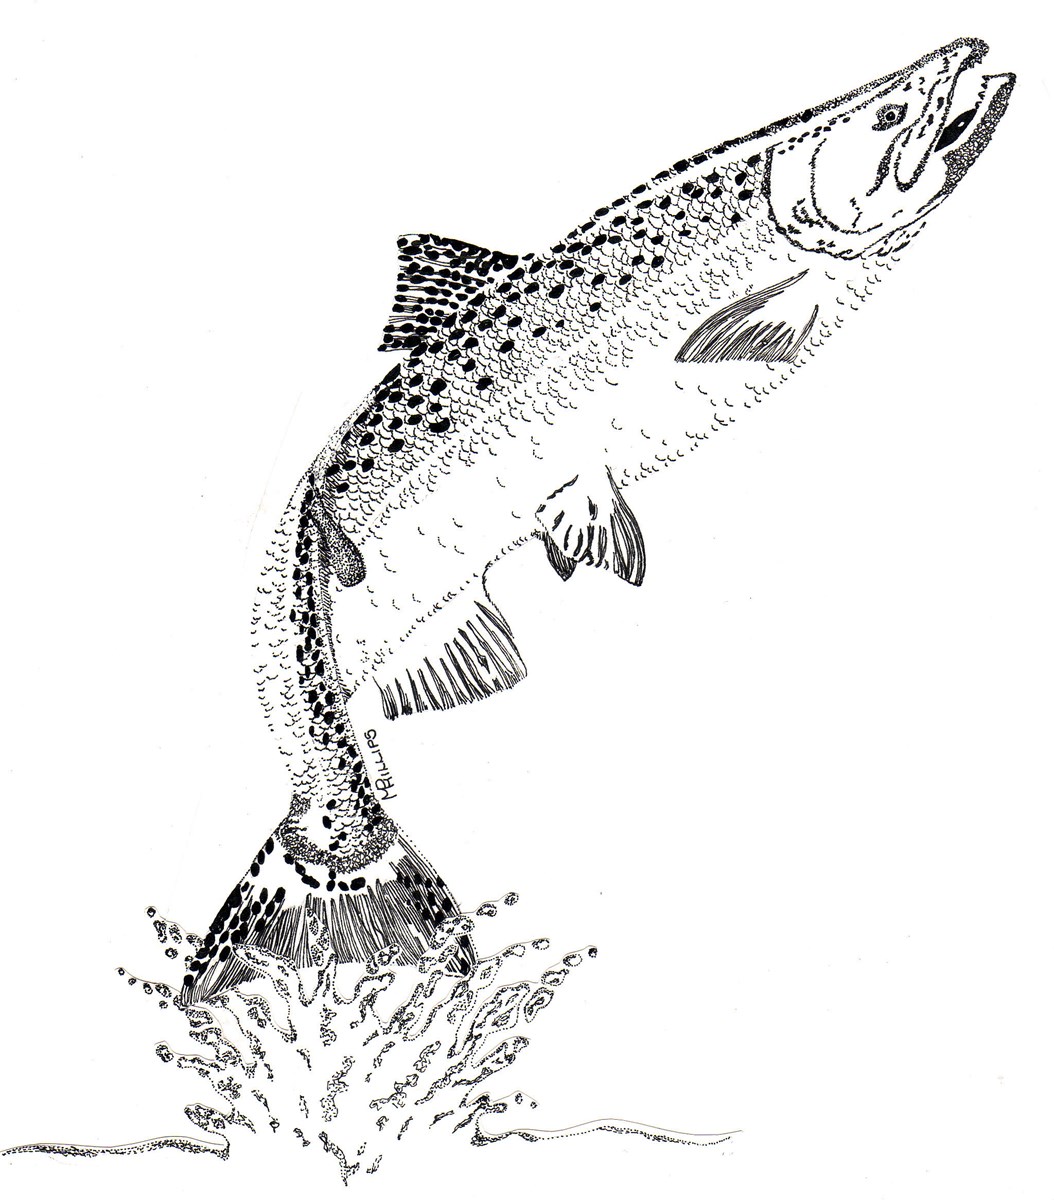 A black and white drawing of a salmon leaping